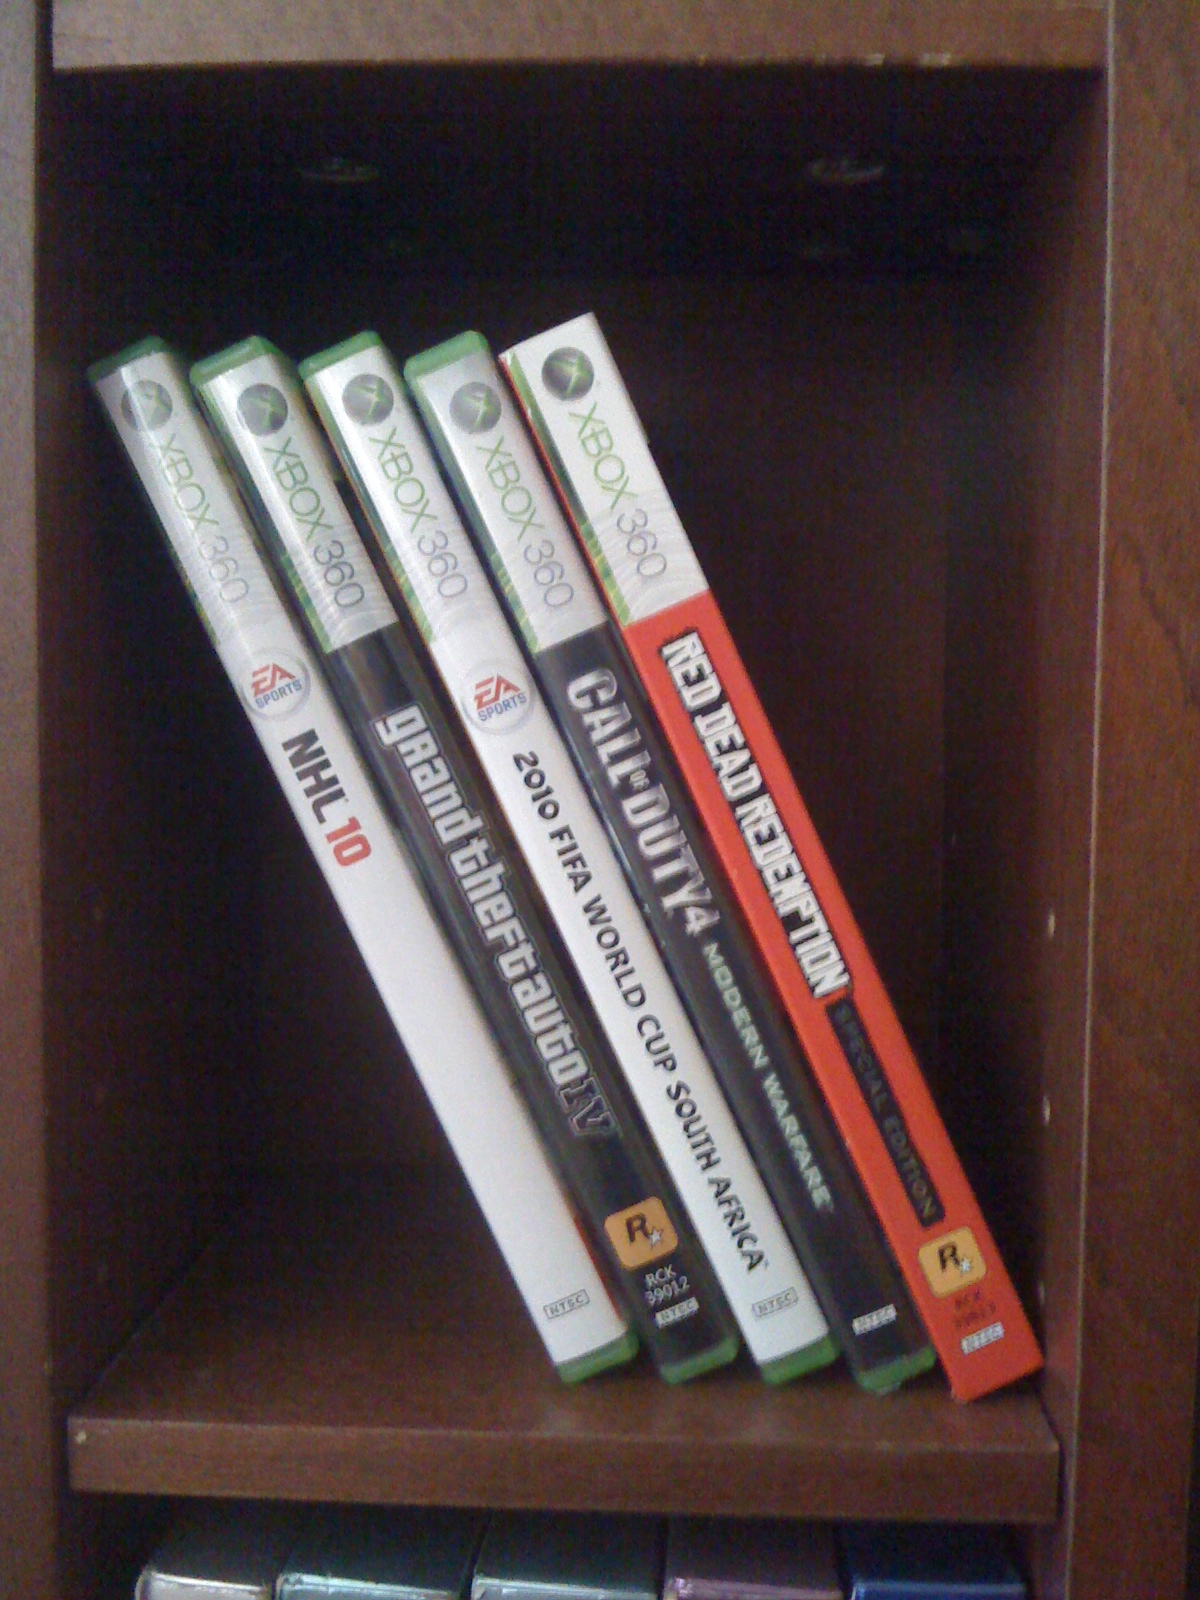 The games I actually play still.  